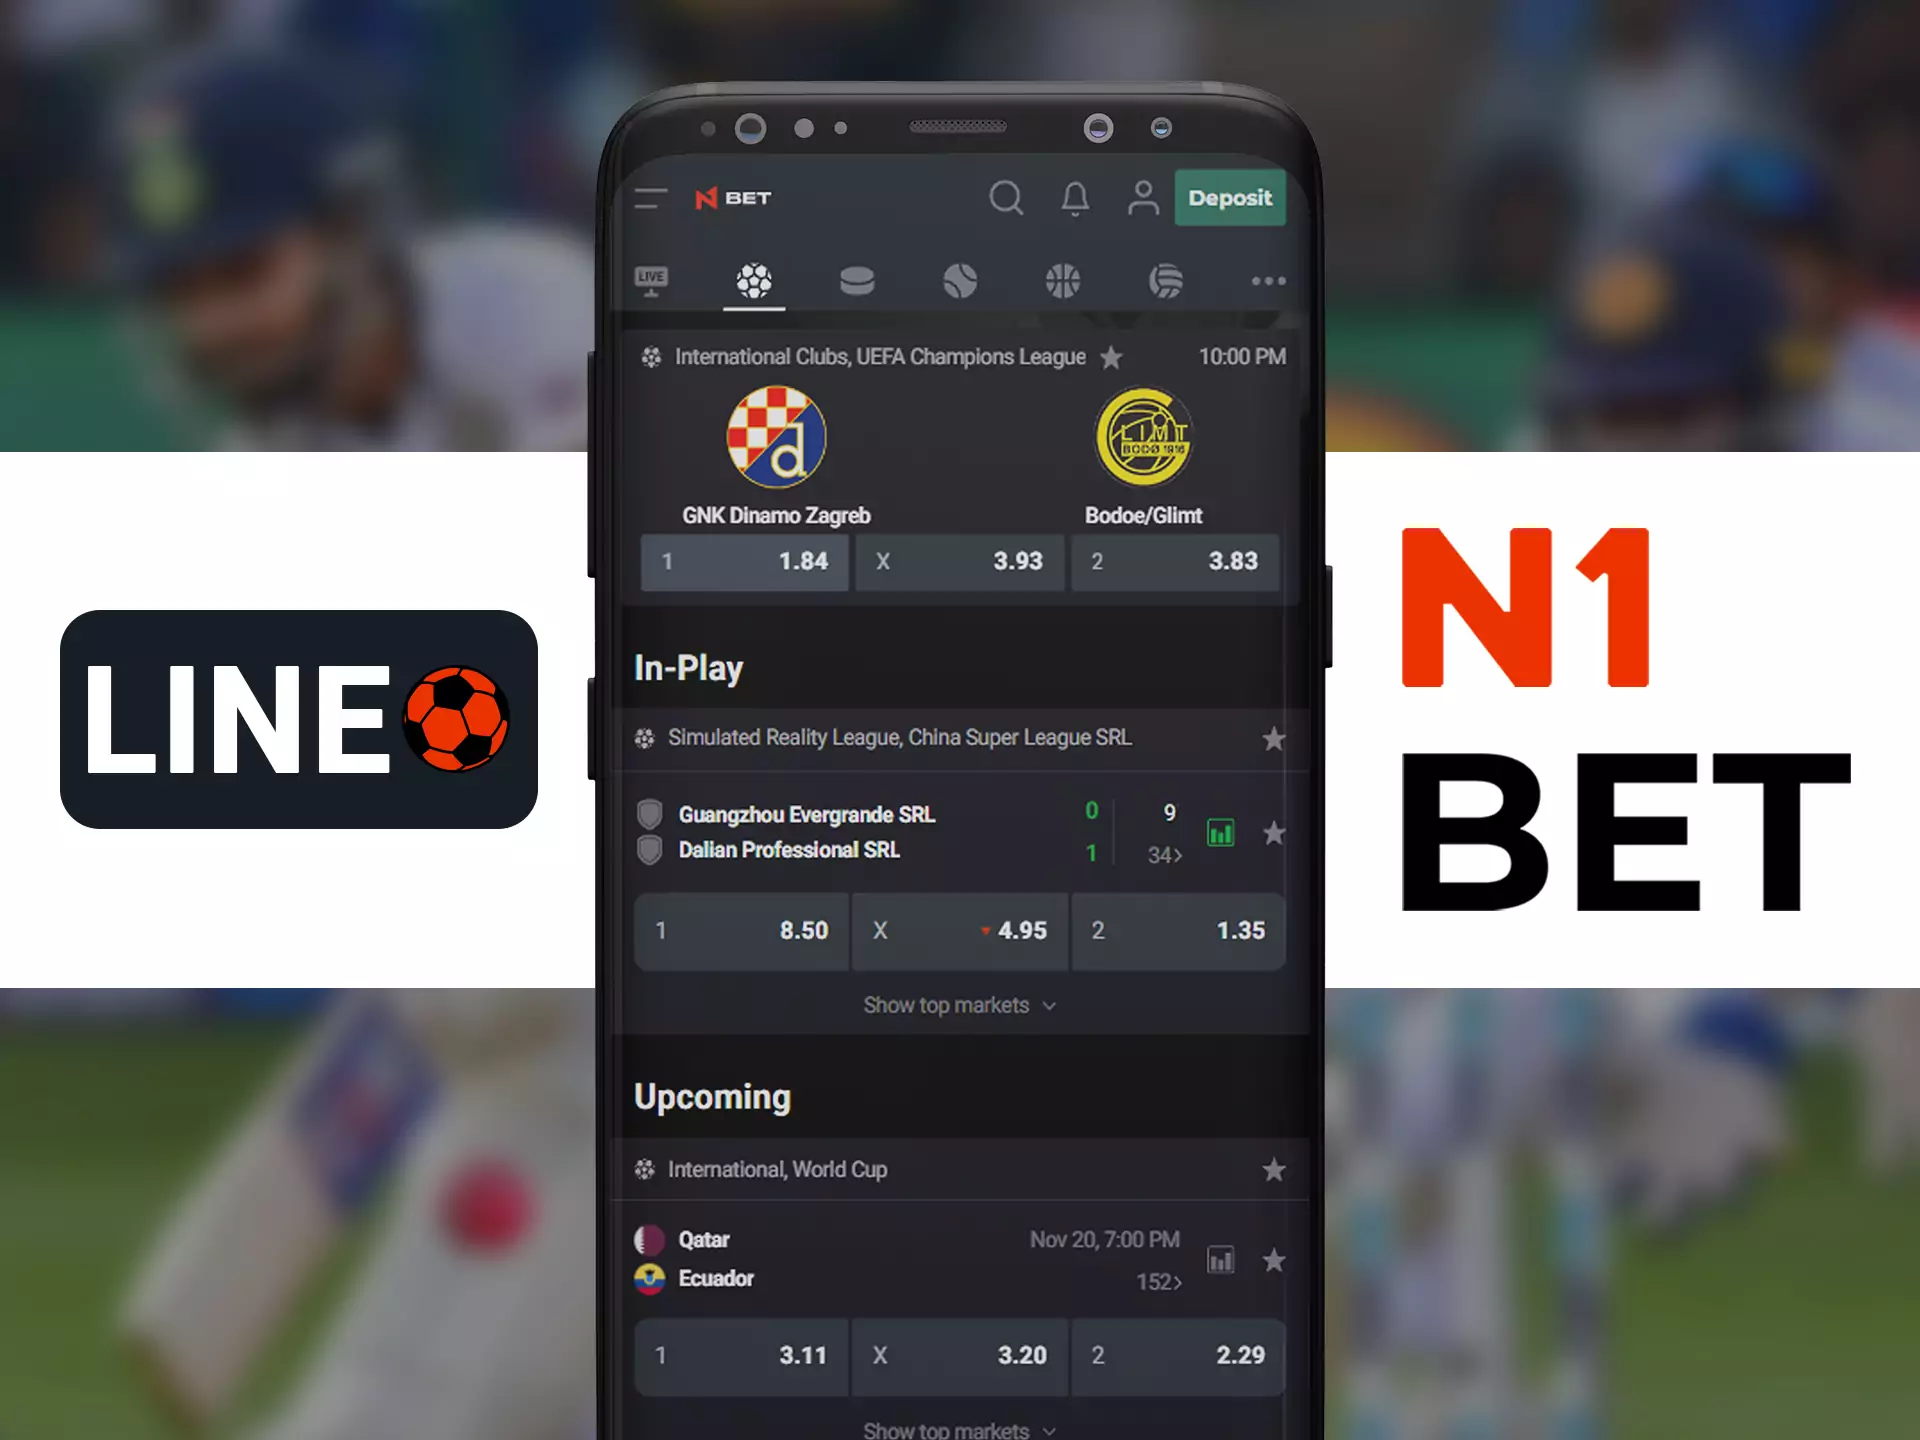 Place your bets on the upcoming matches at N1Bet.